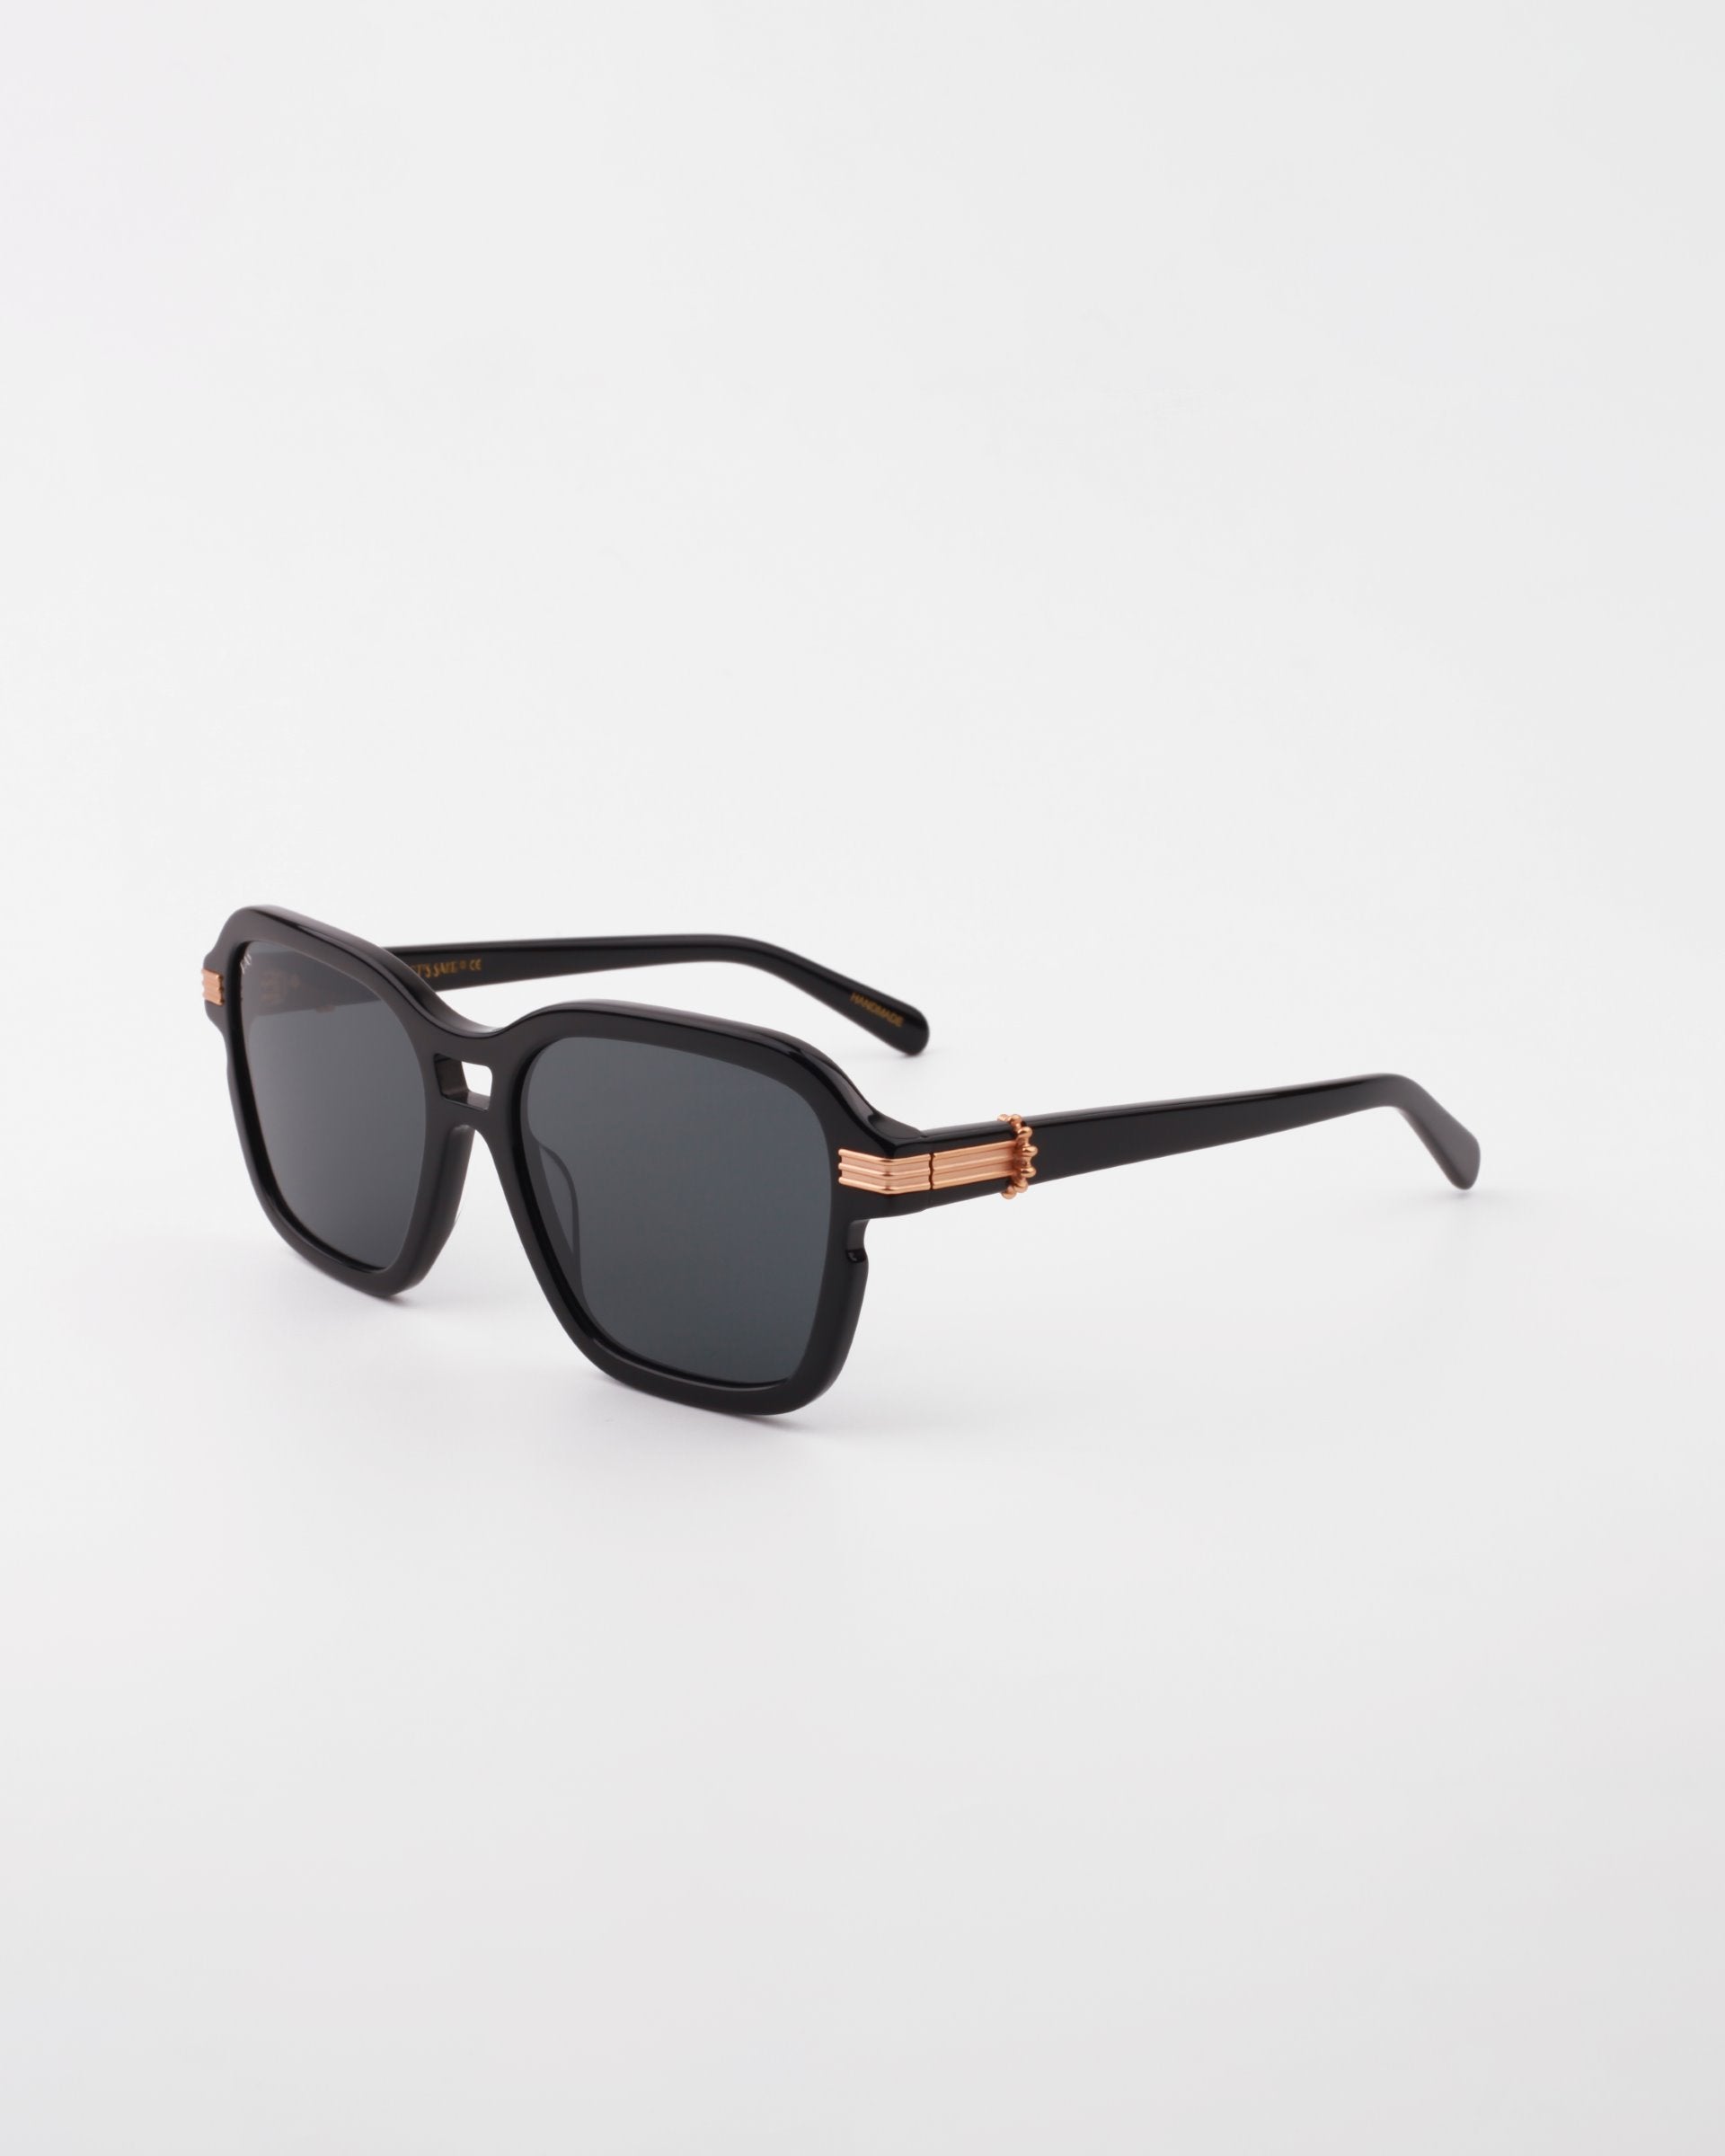 A pair of black Shadyside by For Art's Sake® with rectangular frames and shatter-resistant nylon lenses sits against a plain white background. The Shadyside feature gold-plated temple details for an added touch of style.